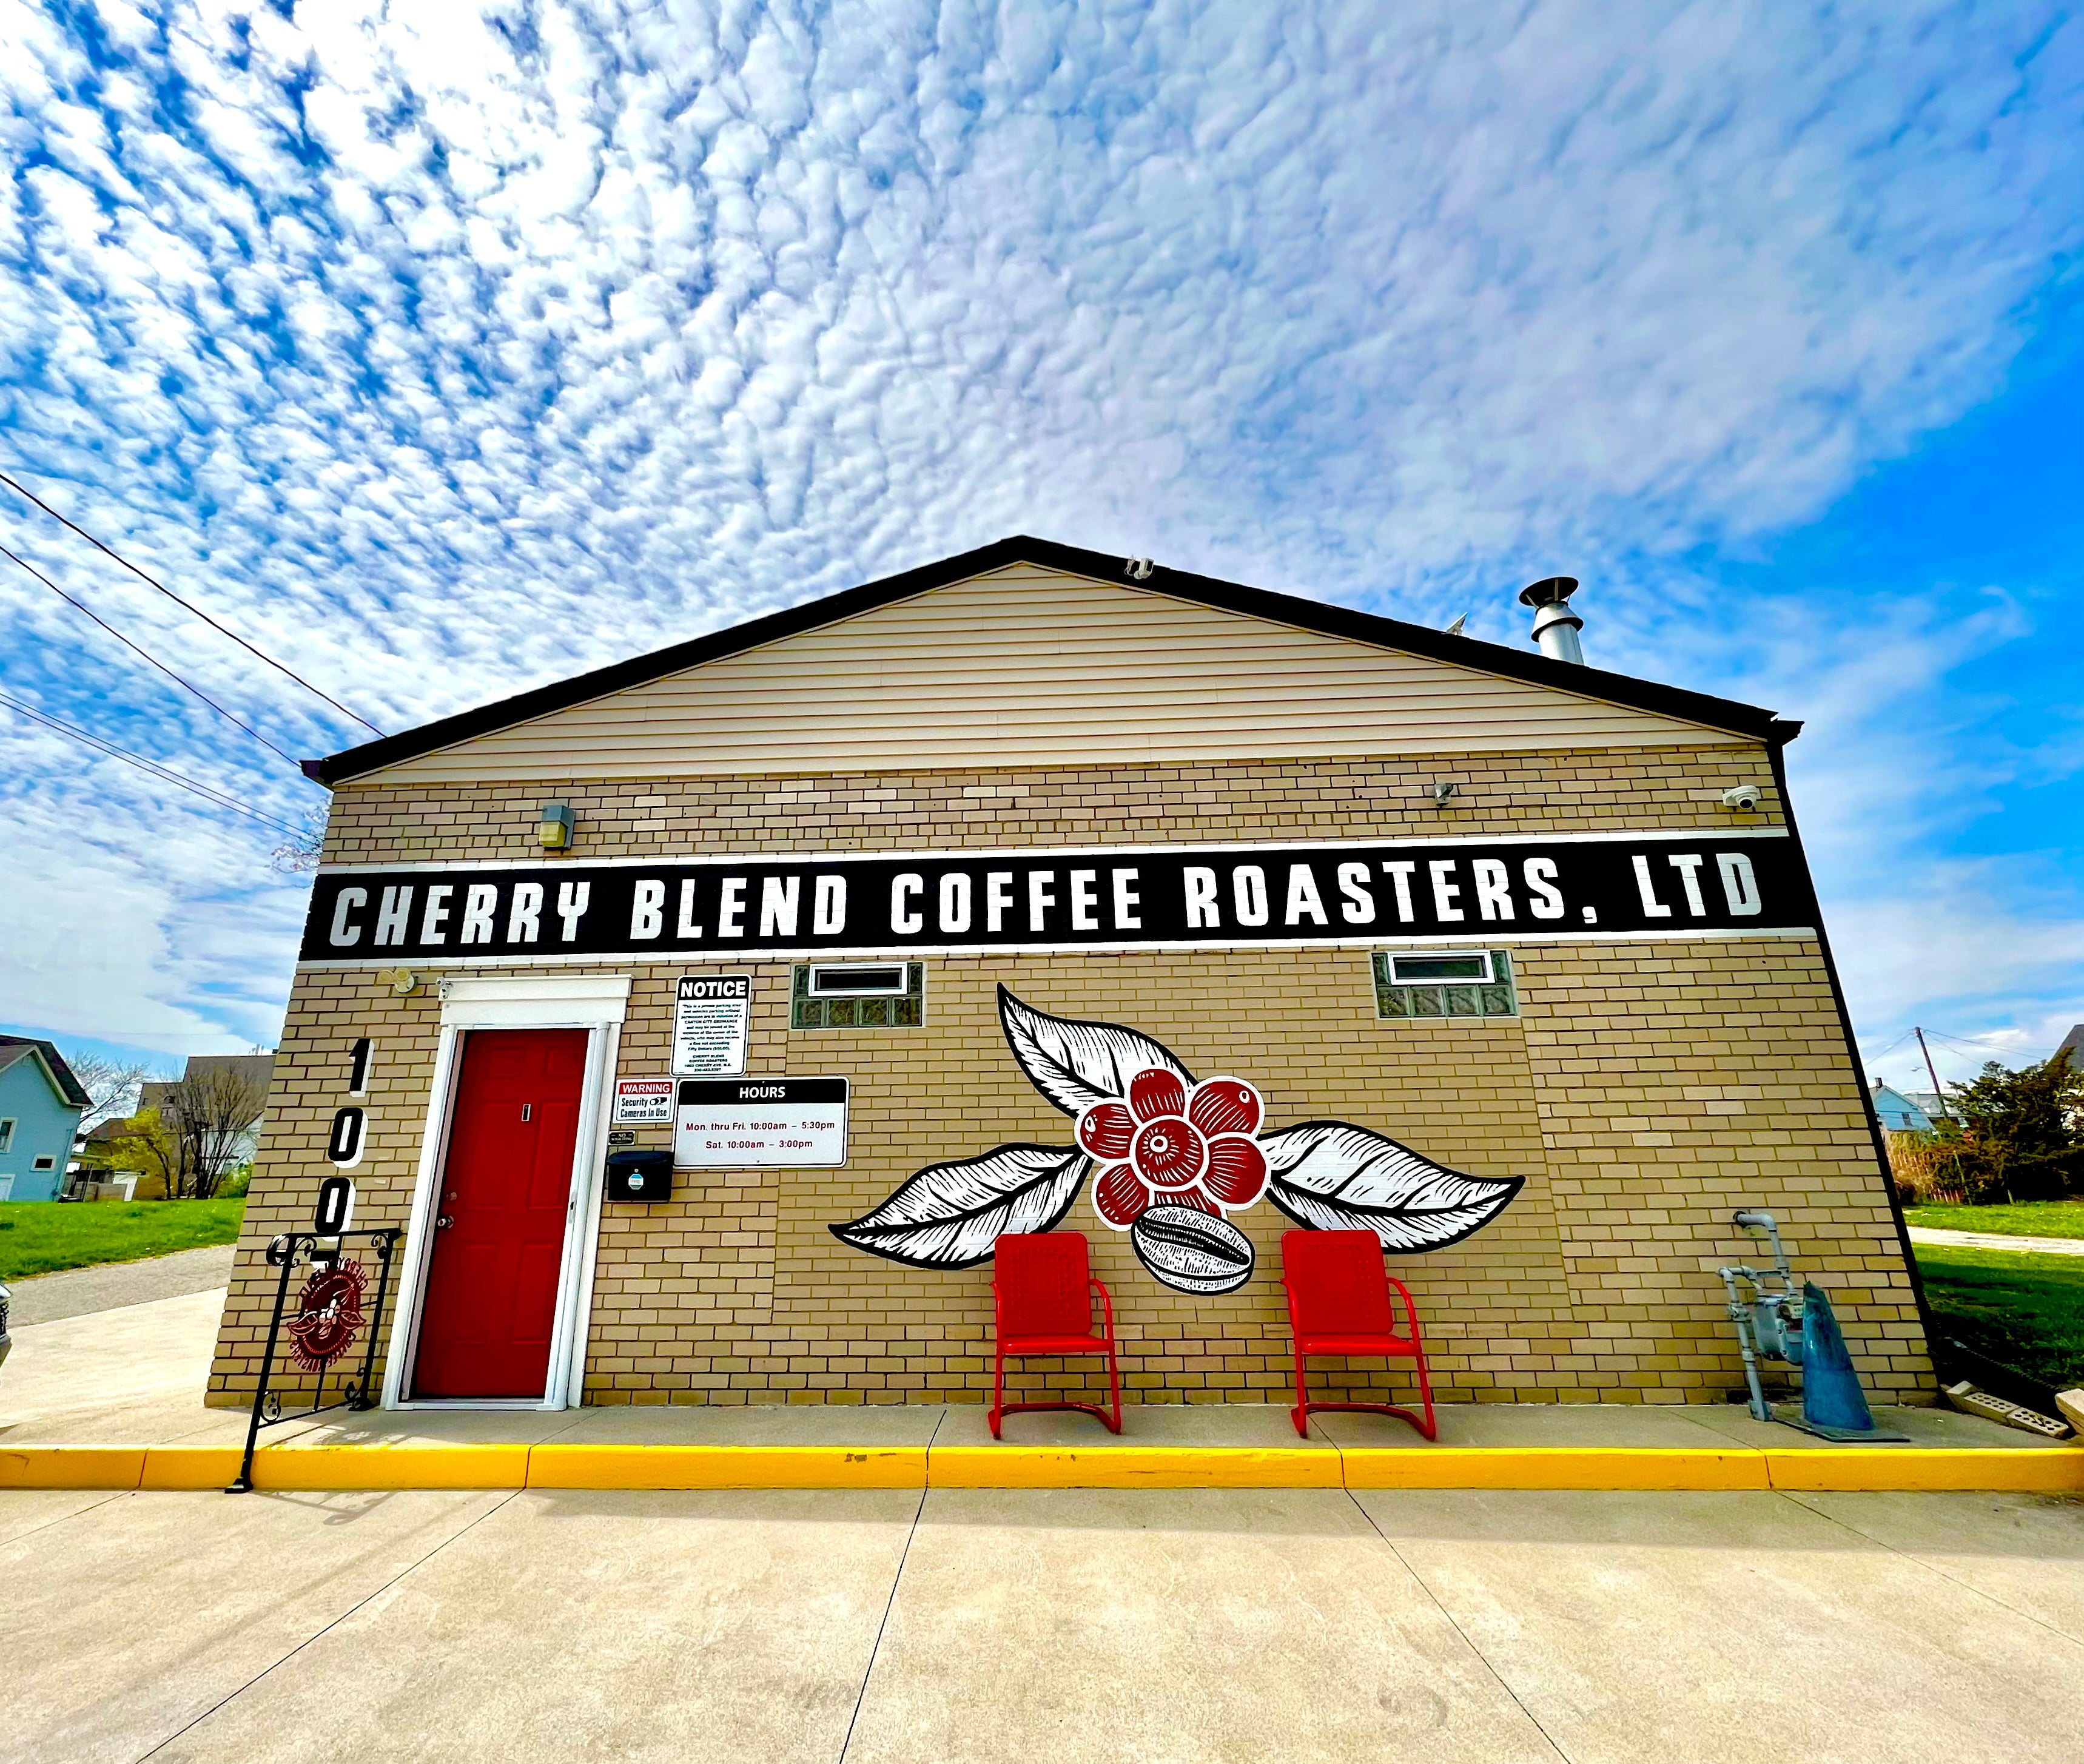 the Chgerry Blend Coffee Roasters building in Canton, Ohio